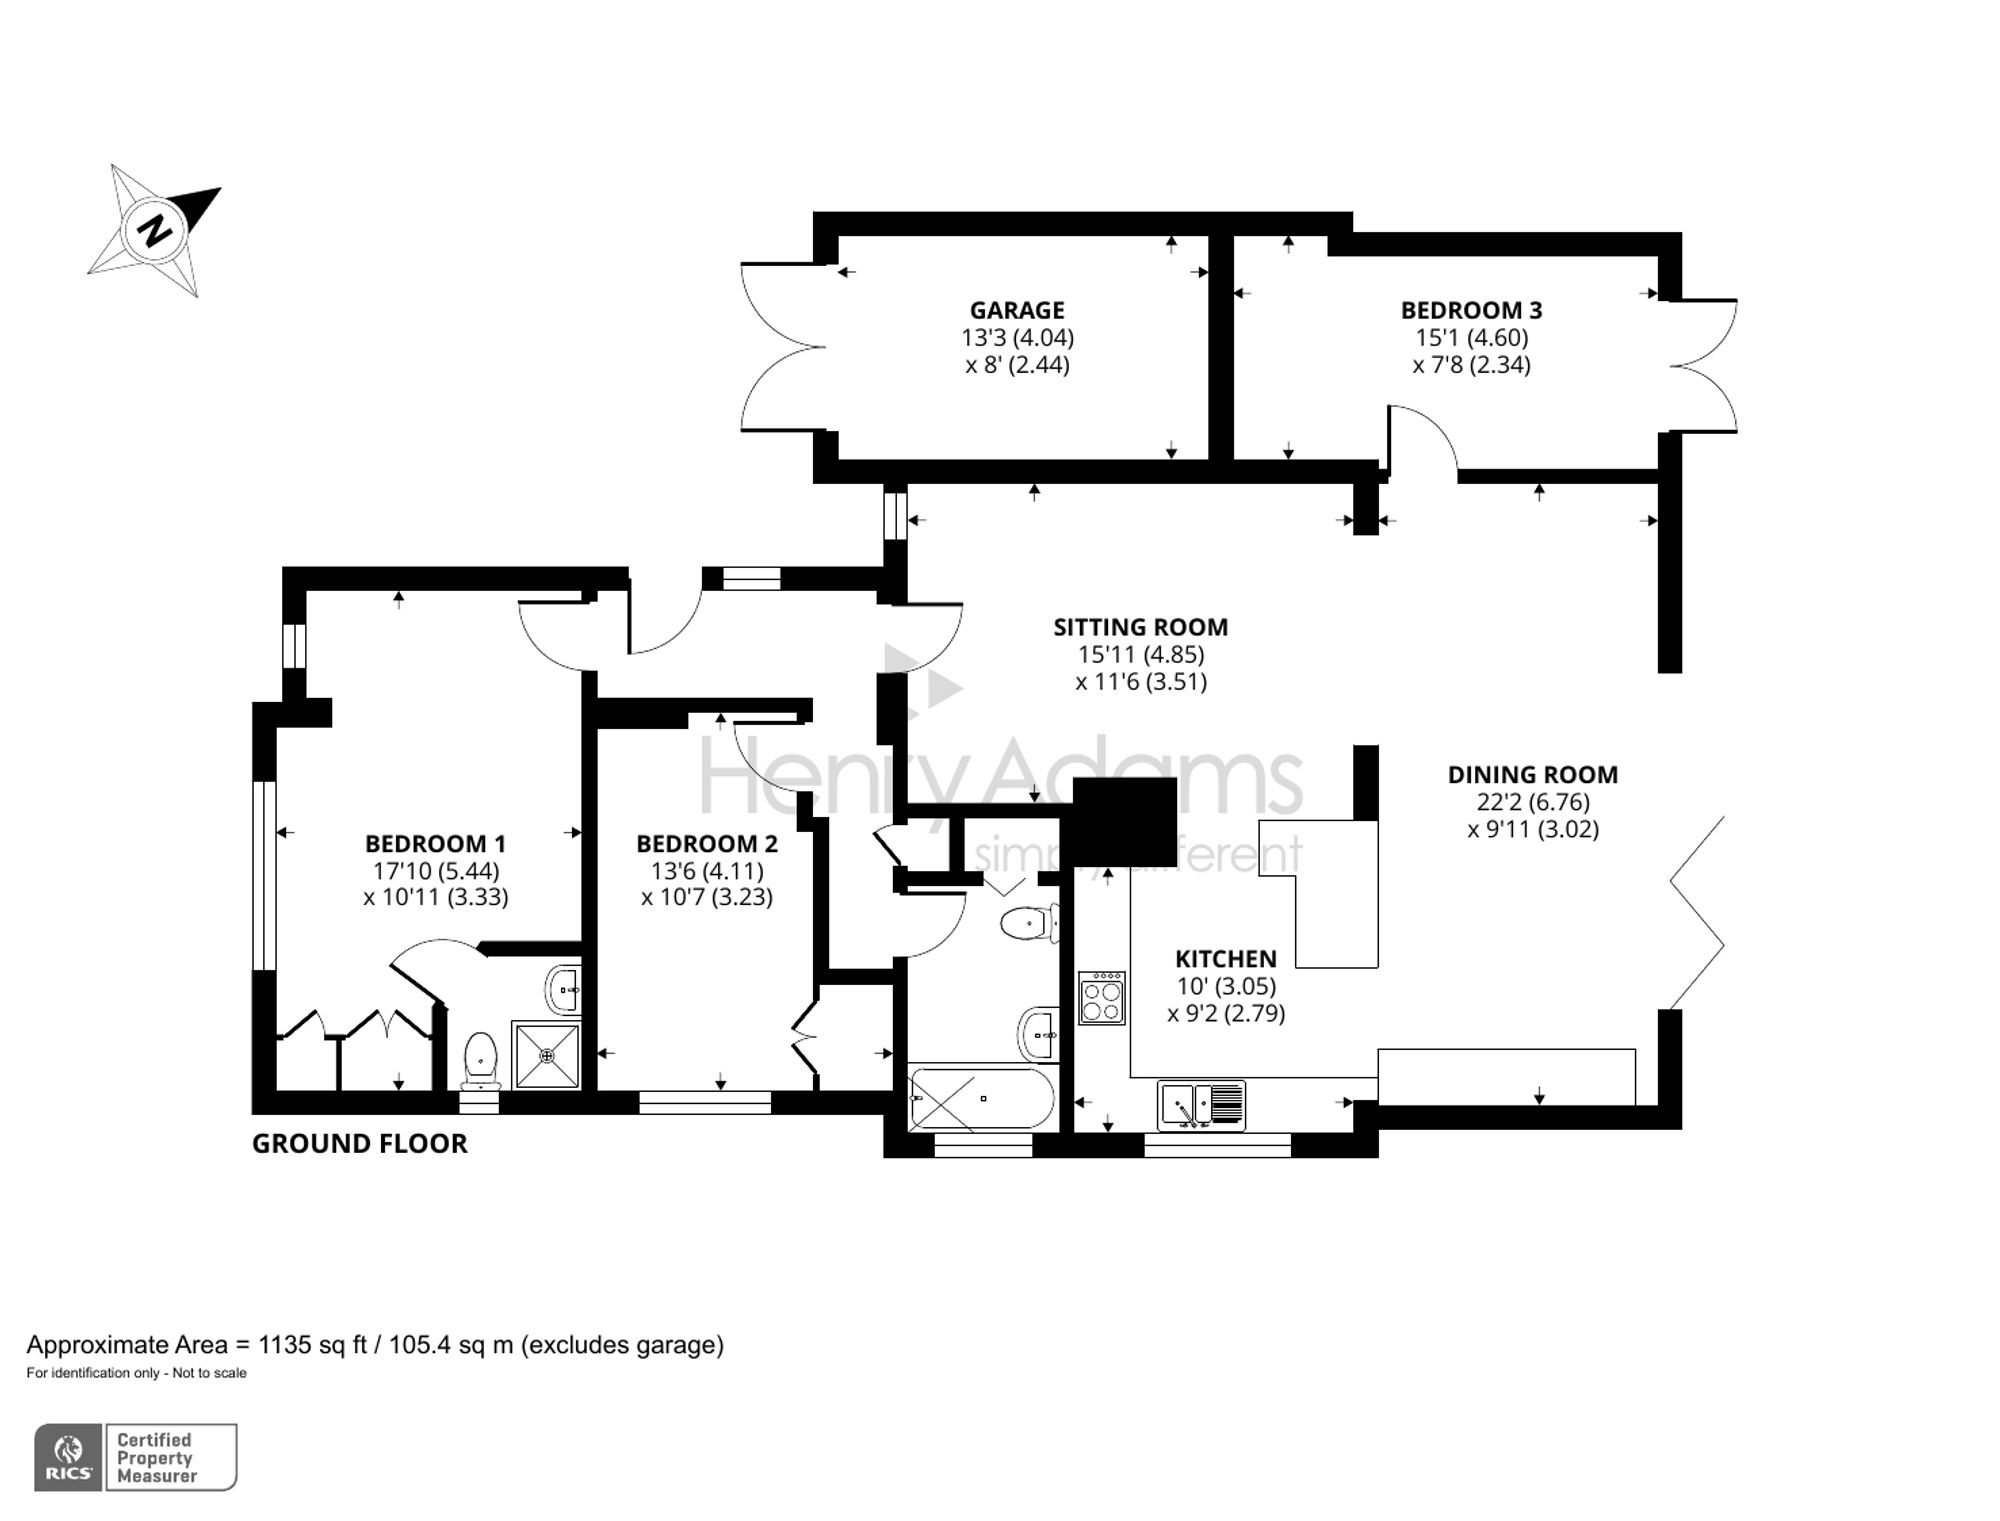 Southcote Avenue, West Wittering, PO20 floorplans